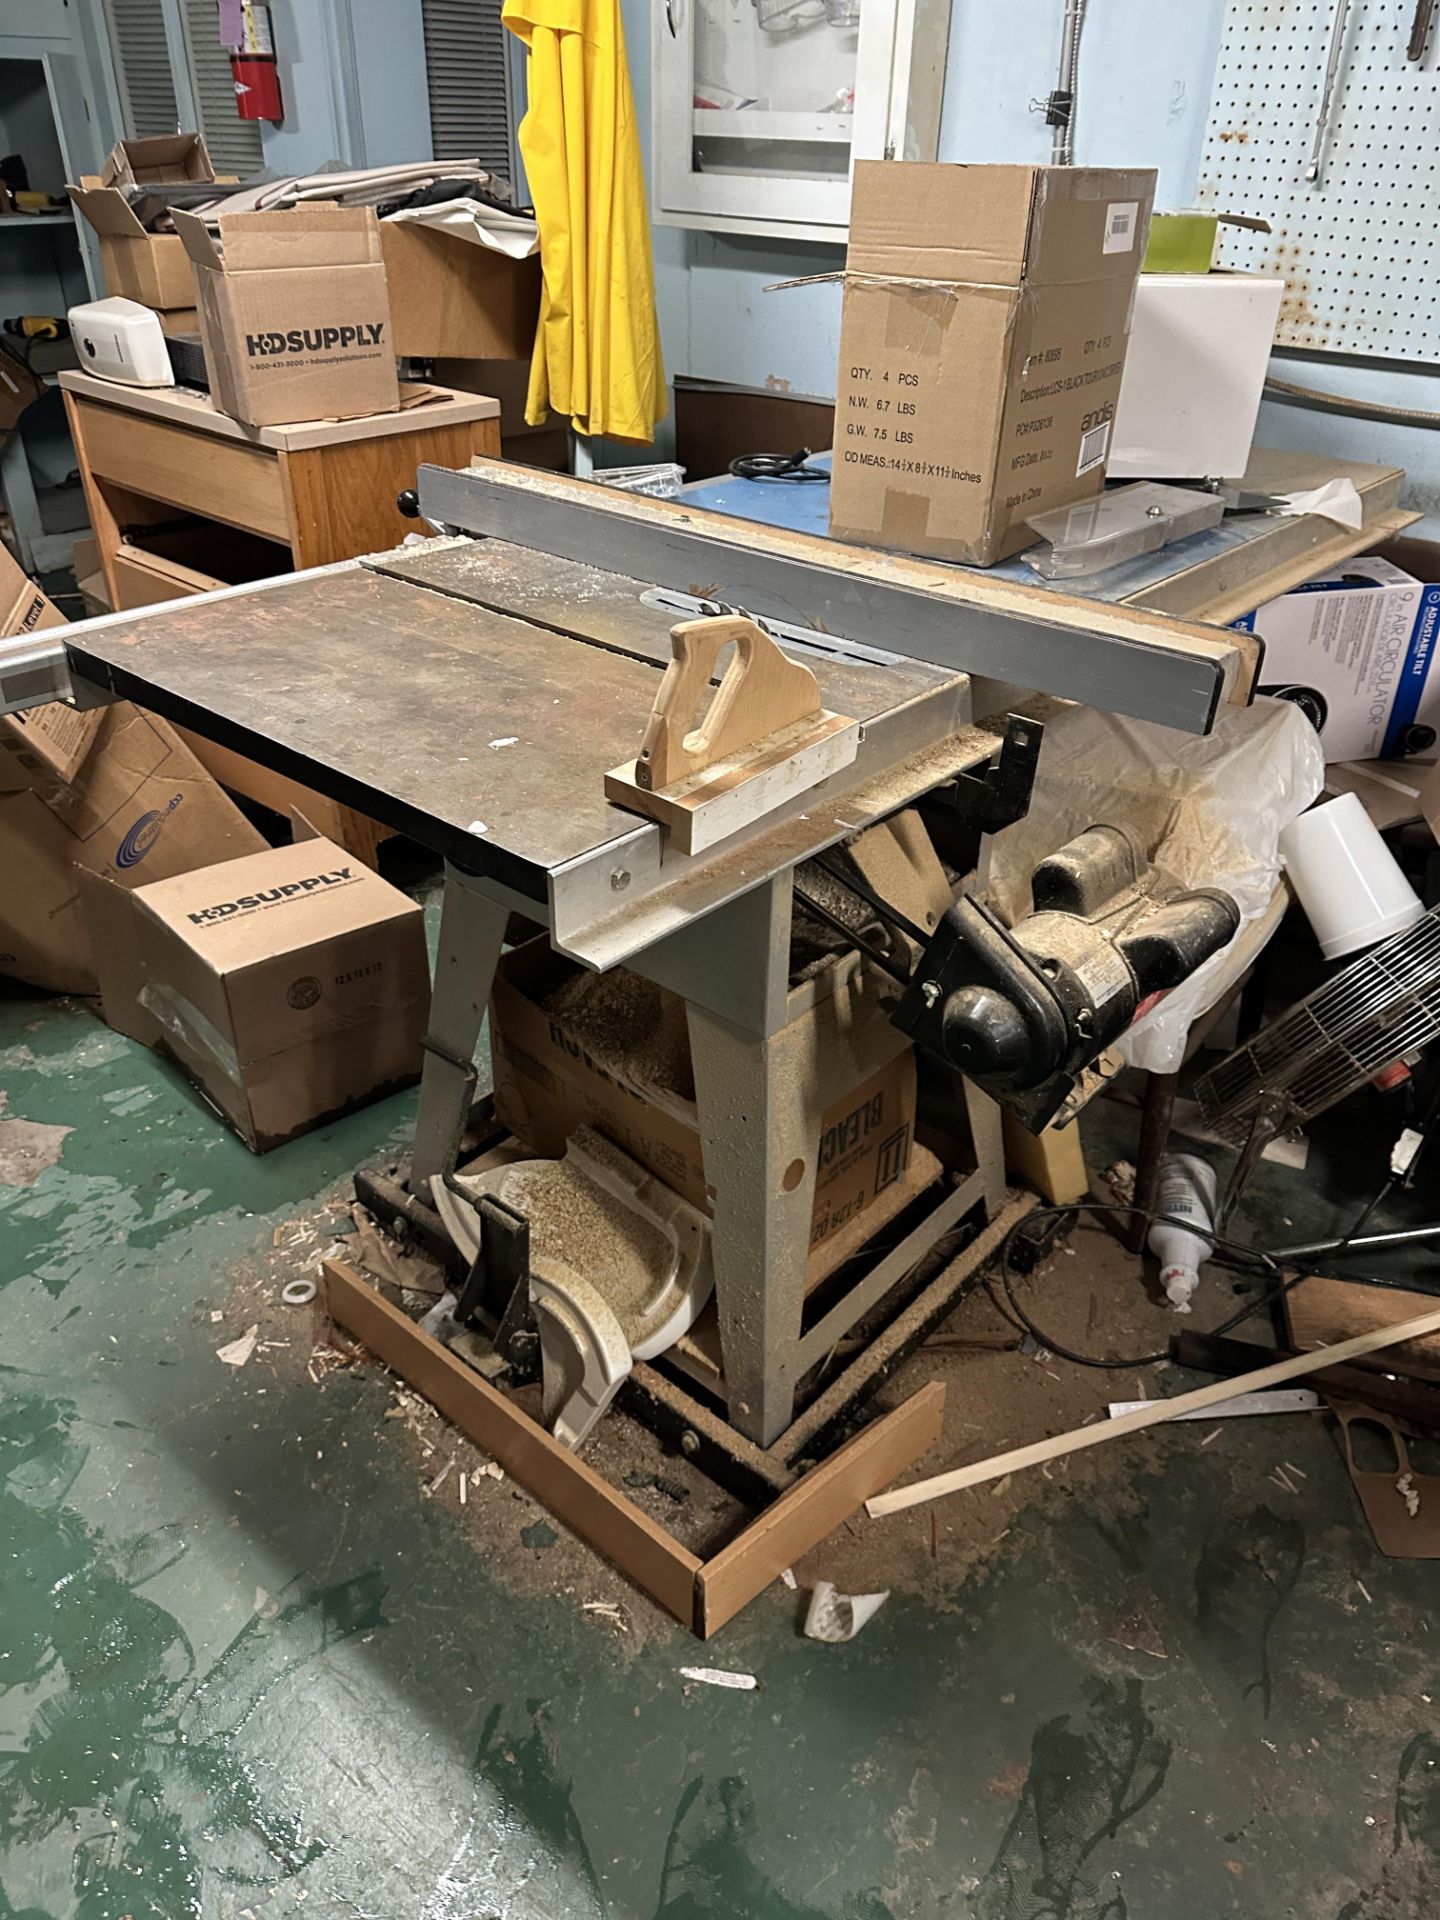 Table Saw w/Table & Fence